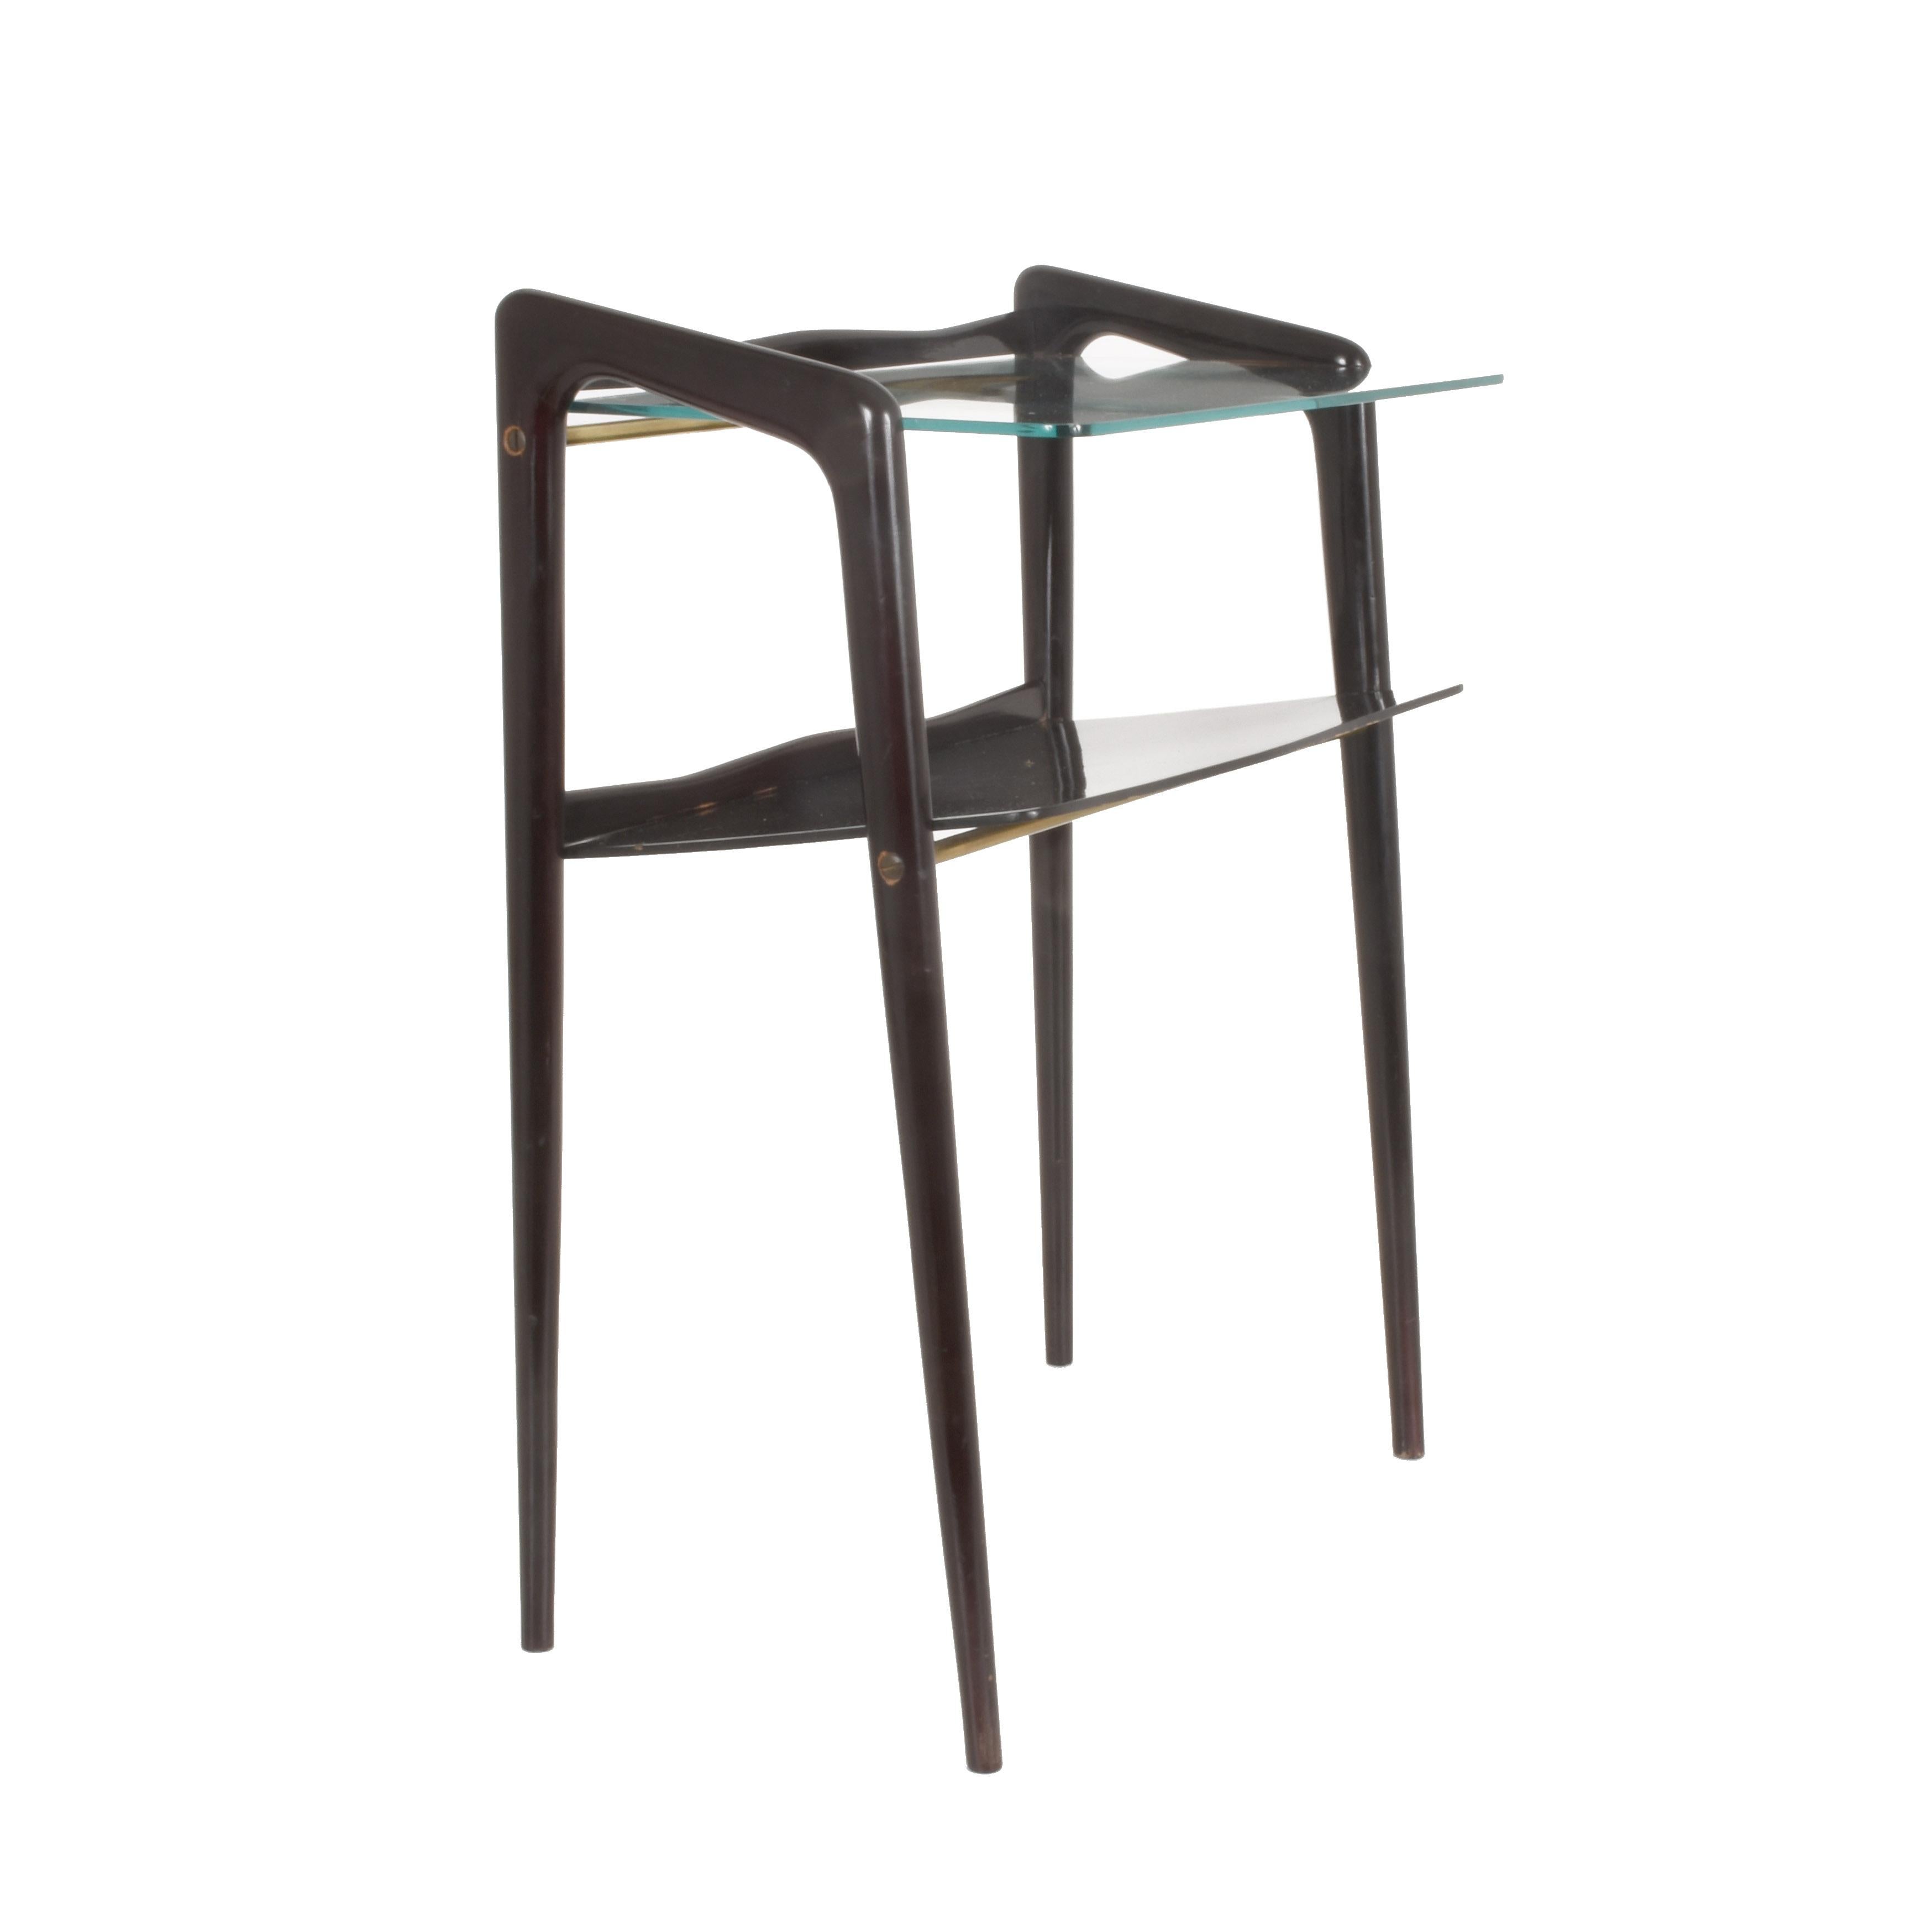 Wonderful midcentury ebonized wood and glass magazine table. This incredible item is attributed to Ico Parisi, in Italy during the 1940s. 

The interior elegance of this surprising piece, the legs and the small drawer is in ebonized wood. The legs